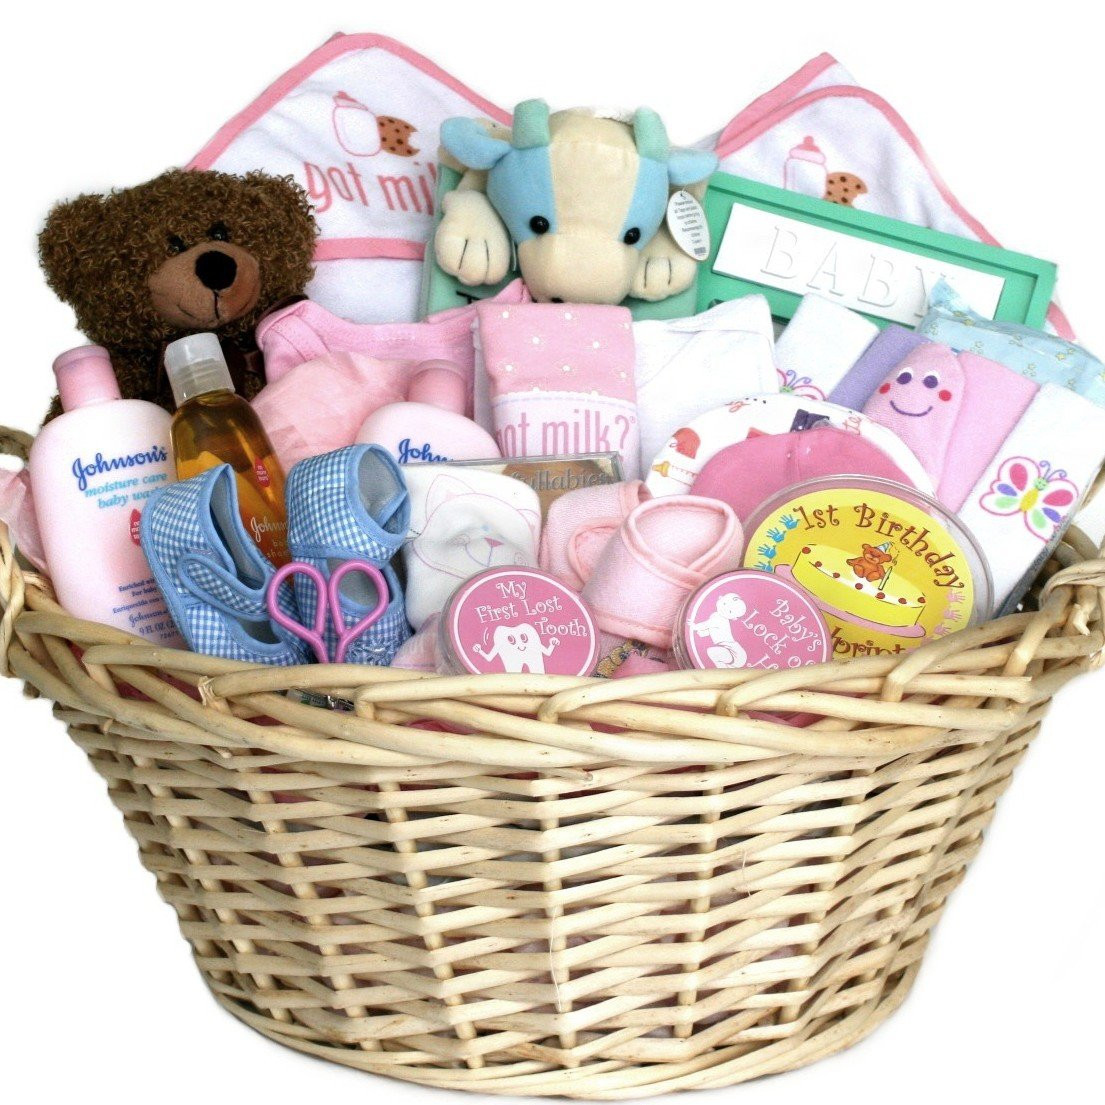 Gift Basket New Baby
 New Baby Gift Basket Ideas Gift Ftempo